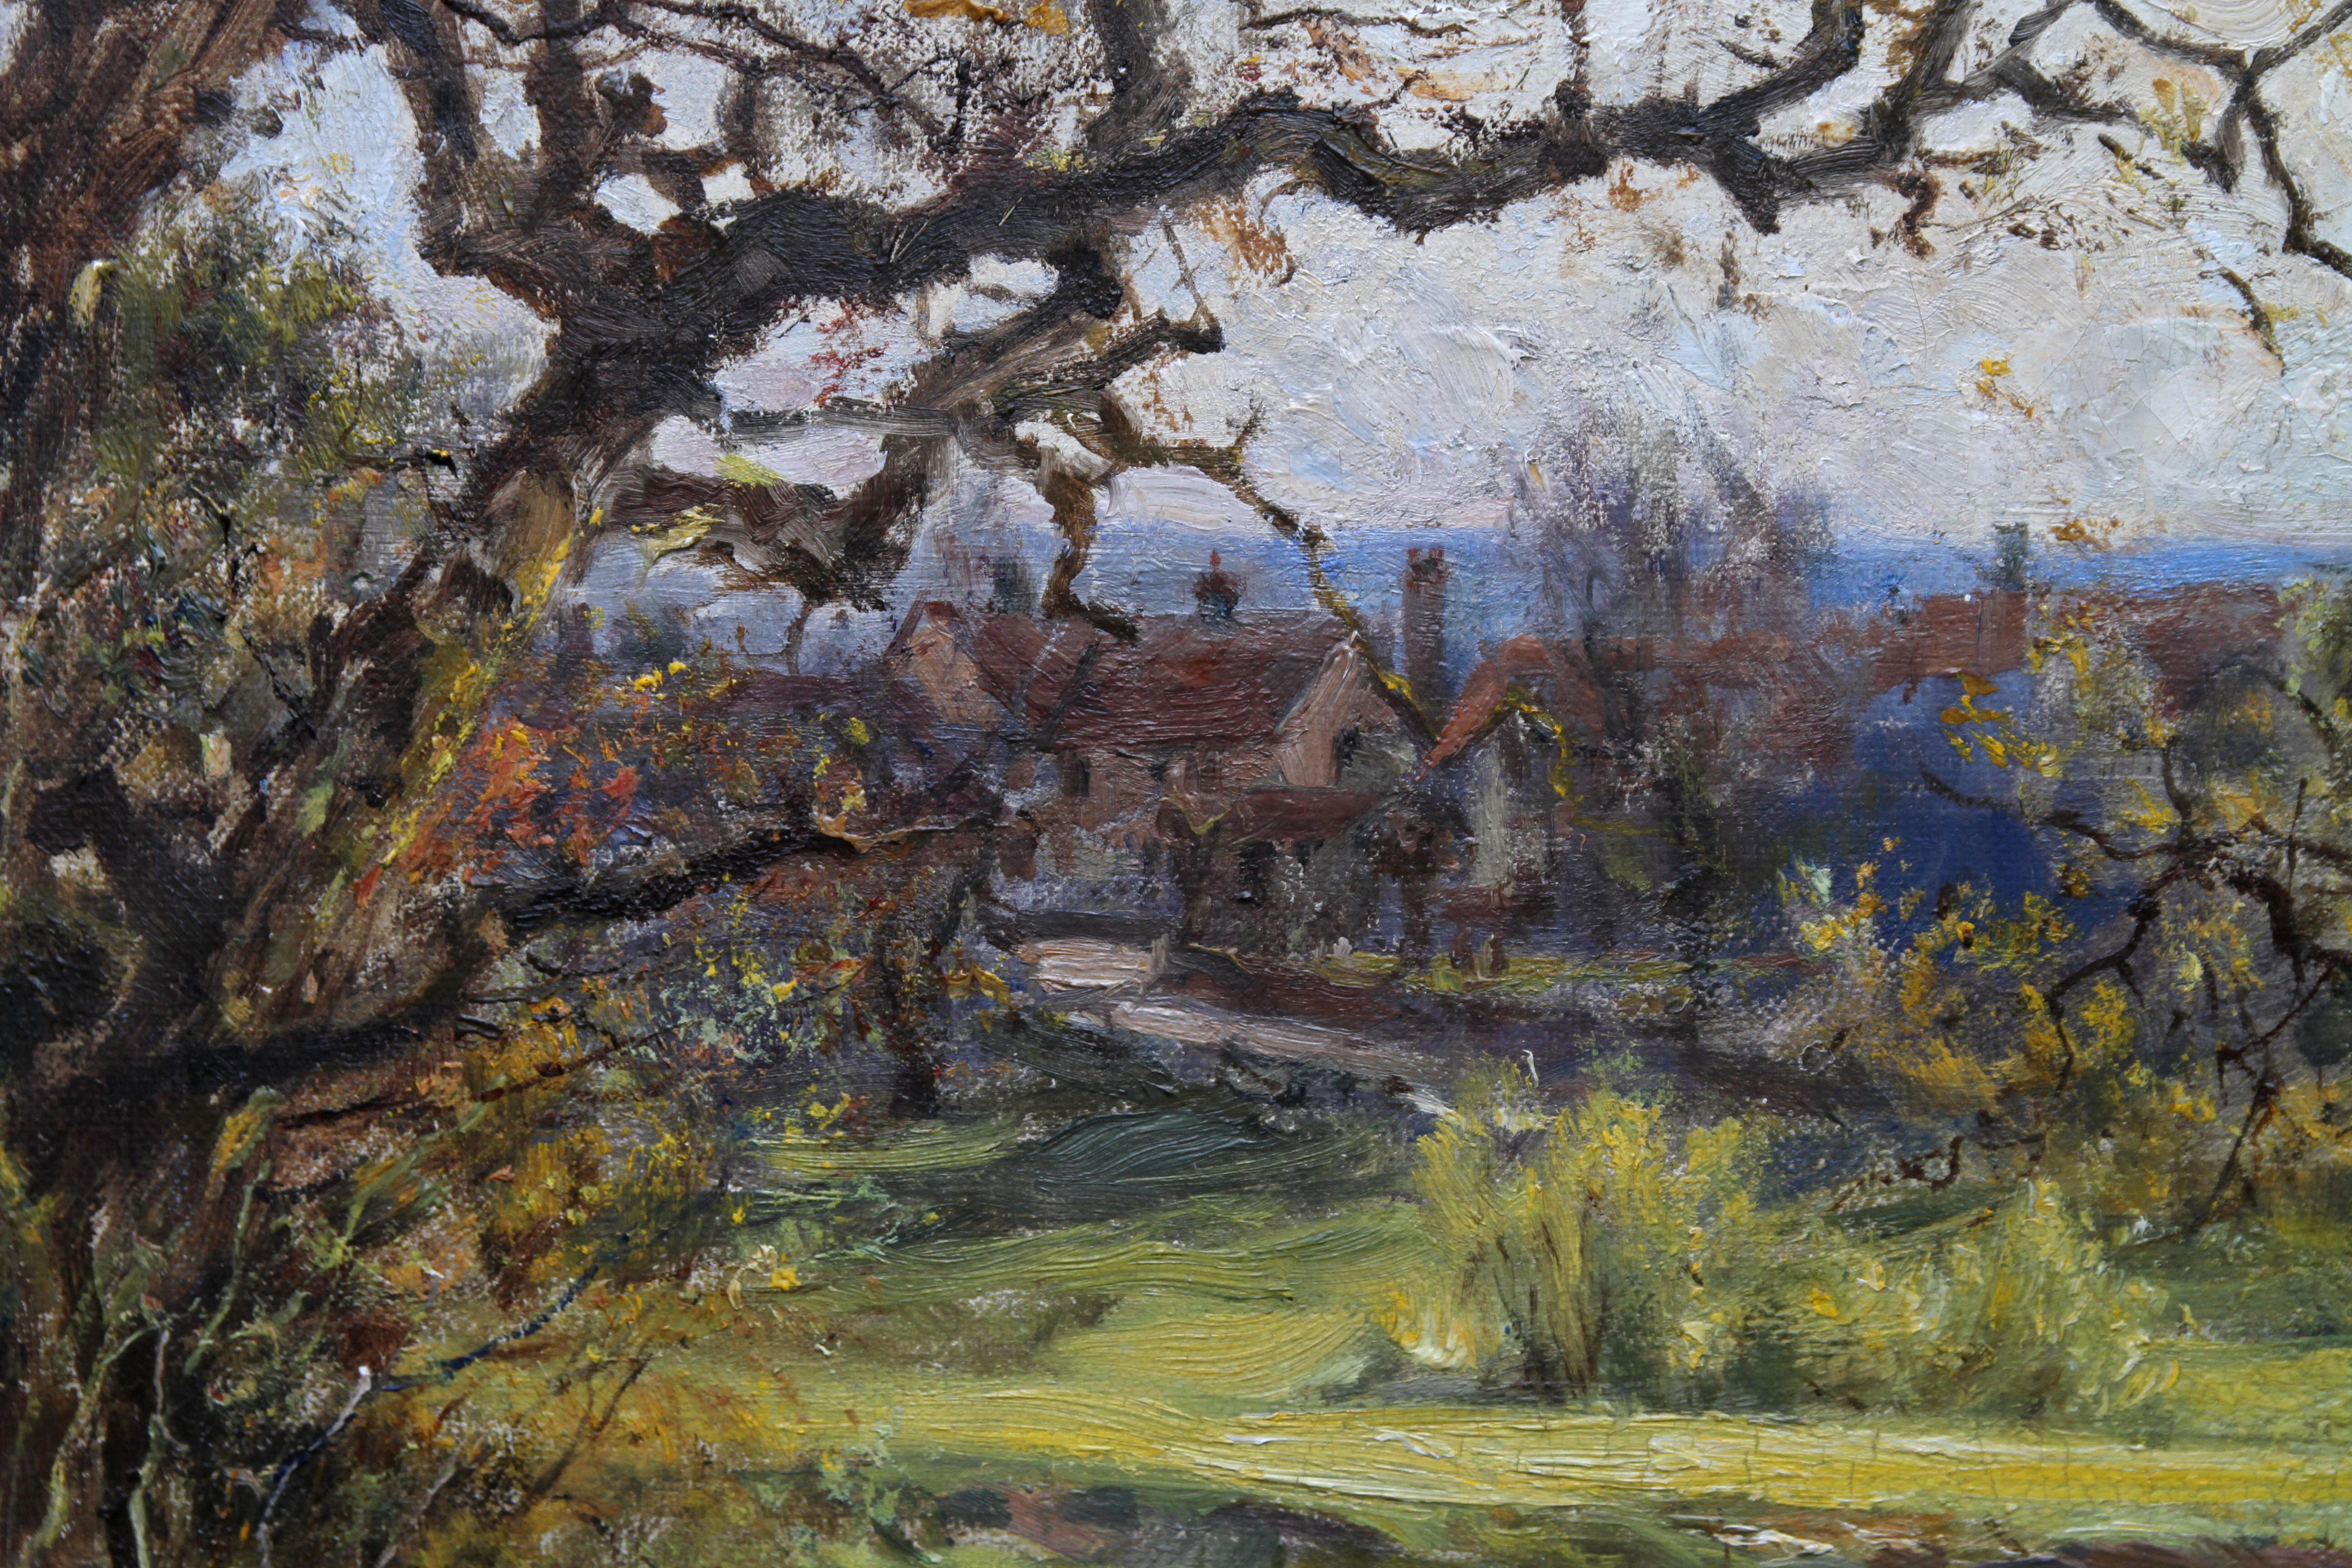 Surrey Landscape - British early 20thC Impressionist Slade School oil painting  For Sale 1